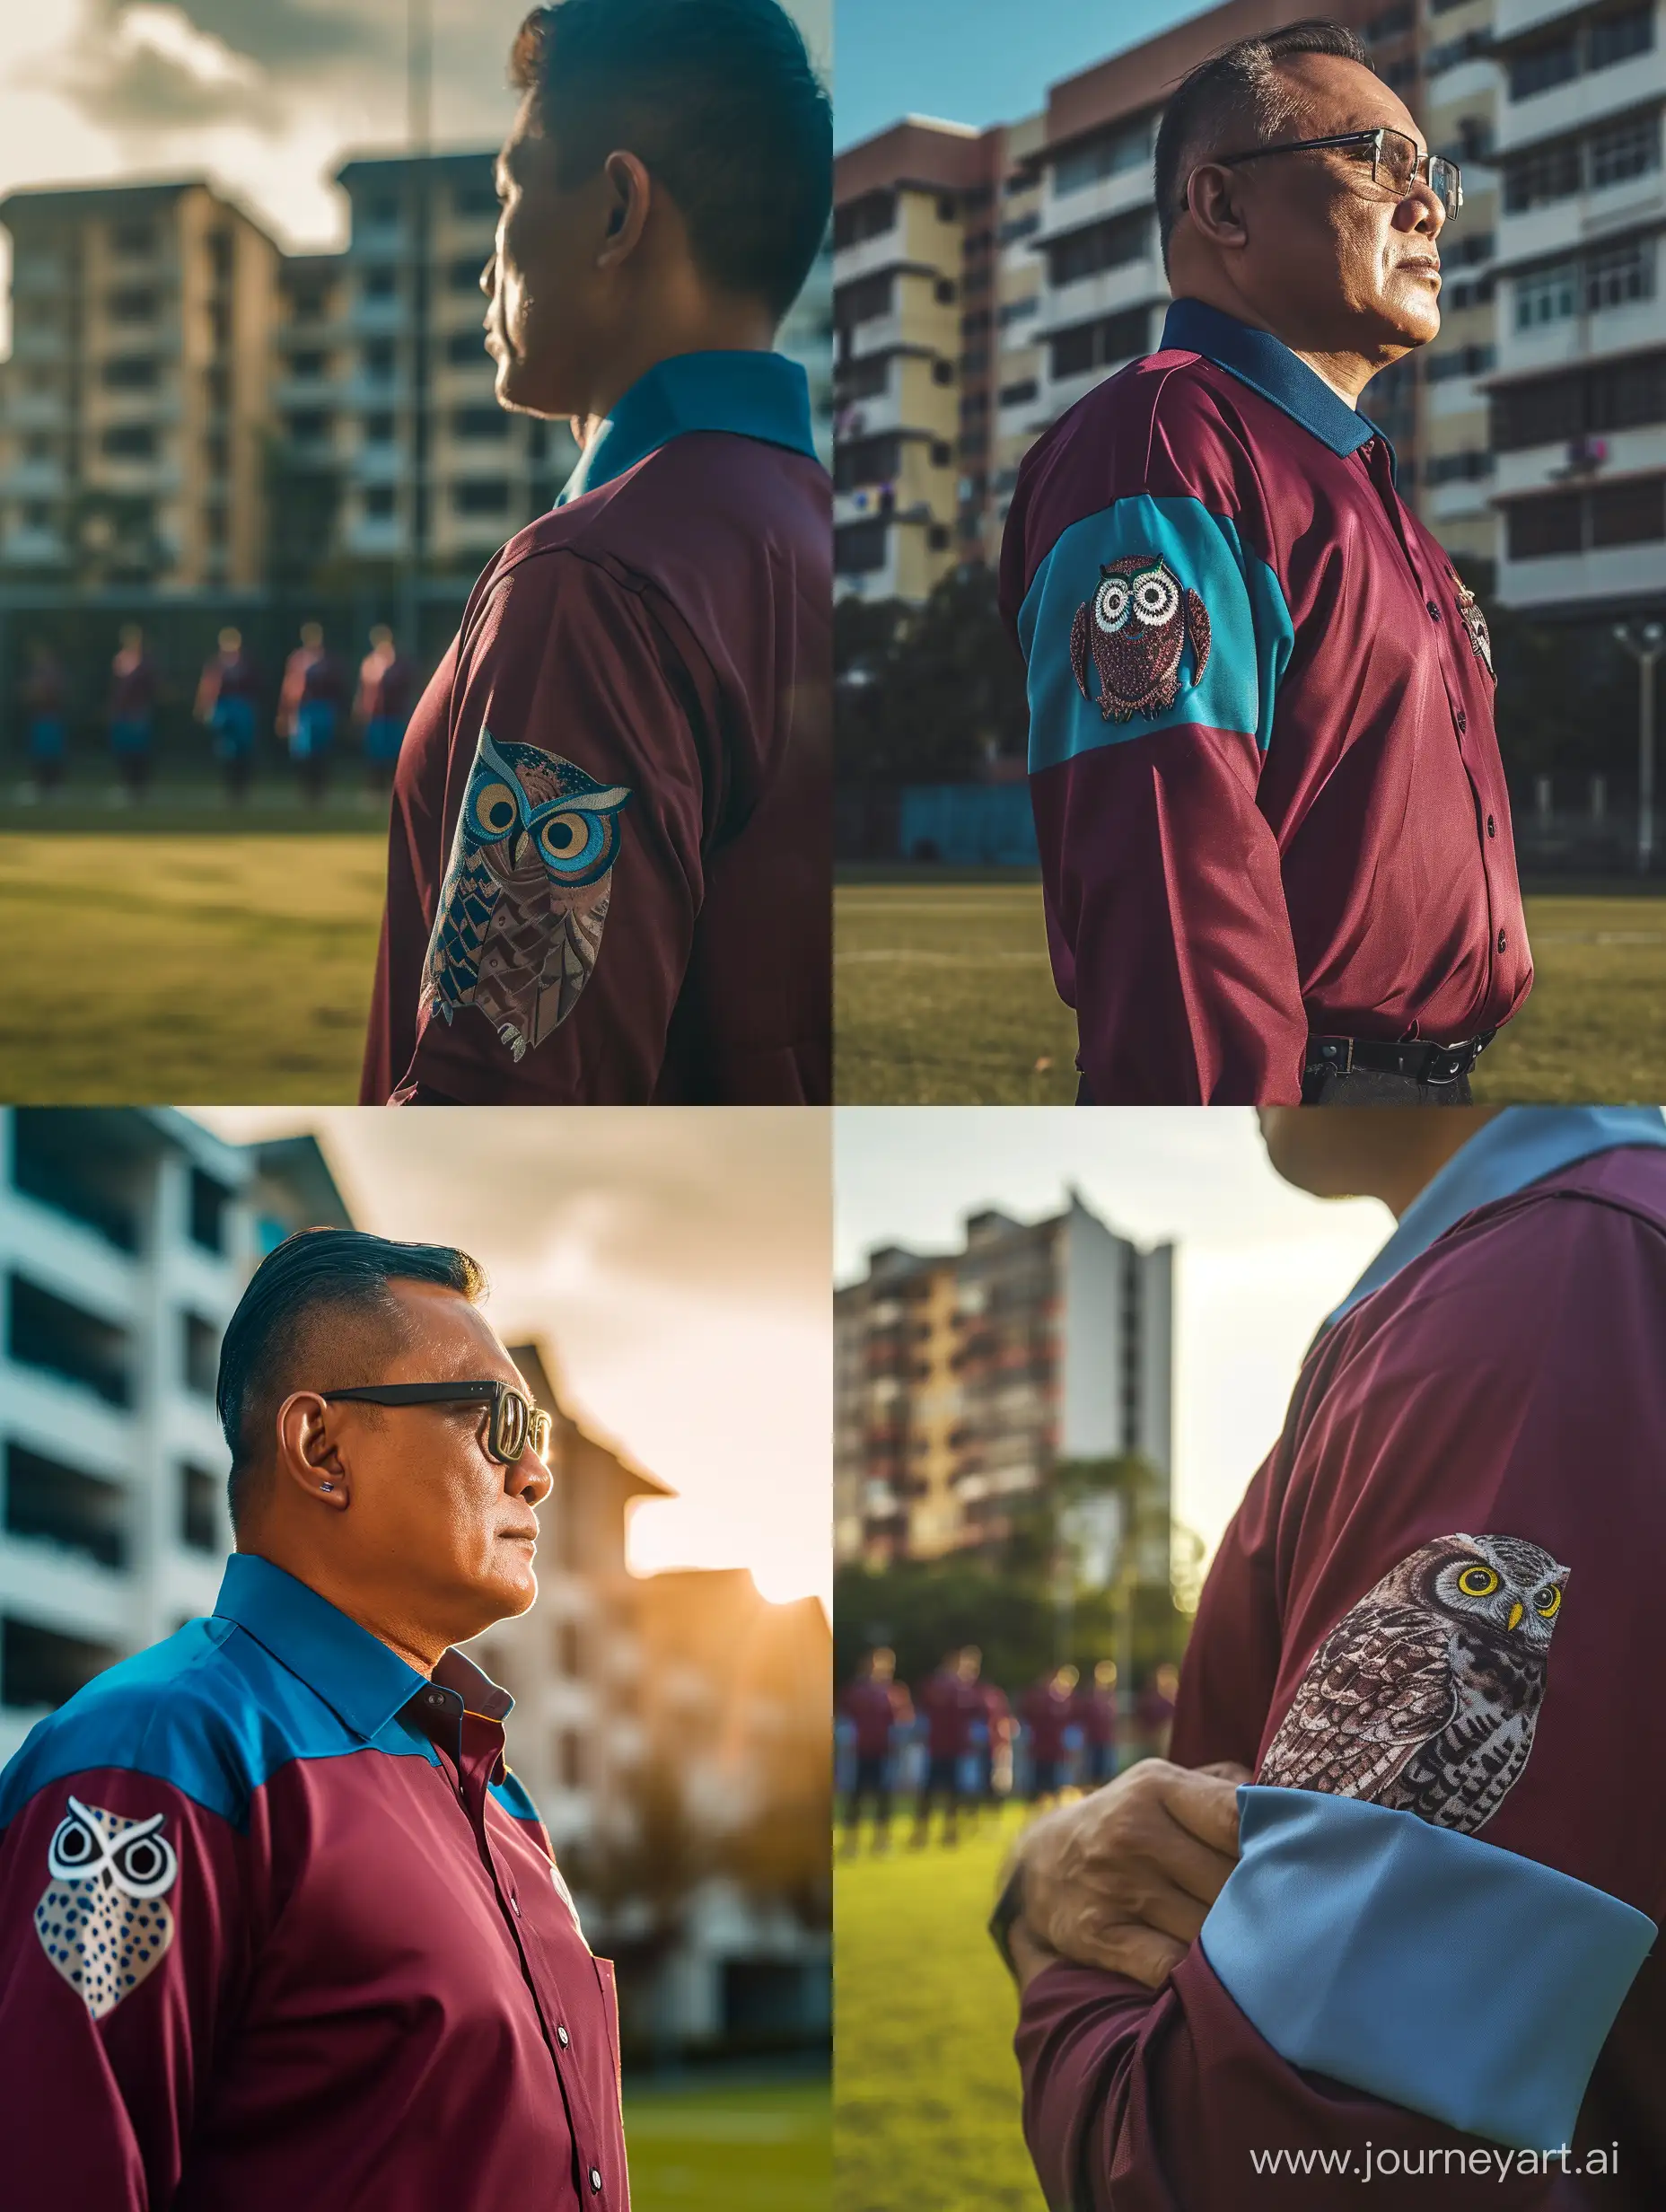 Malay-Football-Team-Coach-in-Maroon-and-Blue-Shirts-with-Owl-Pattern-Sleeve